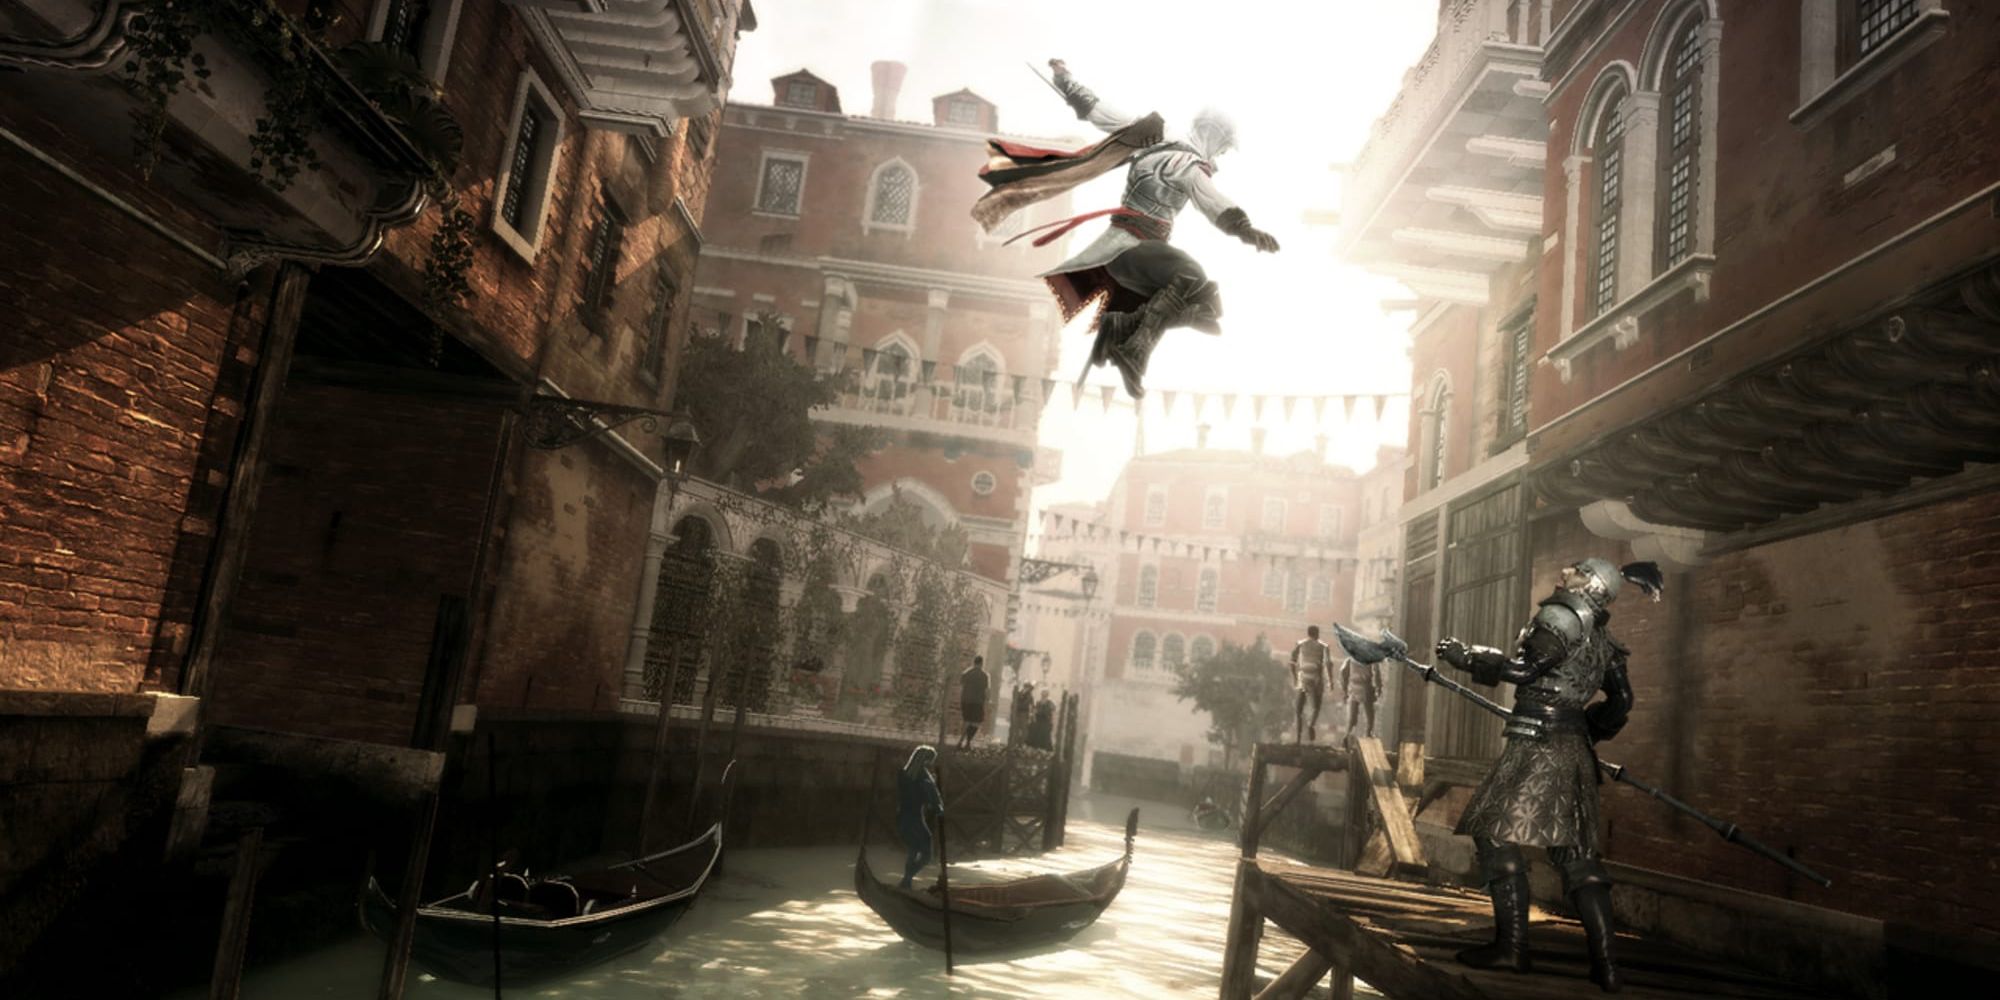 Ezio leaping across a Venetian canal to assassinate a guard in Assassin's Creed 2.